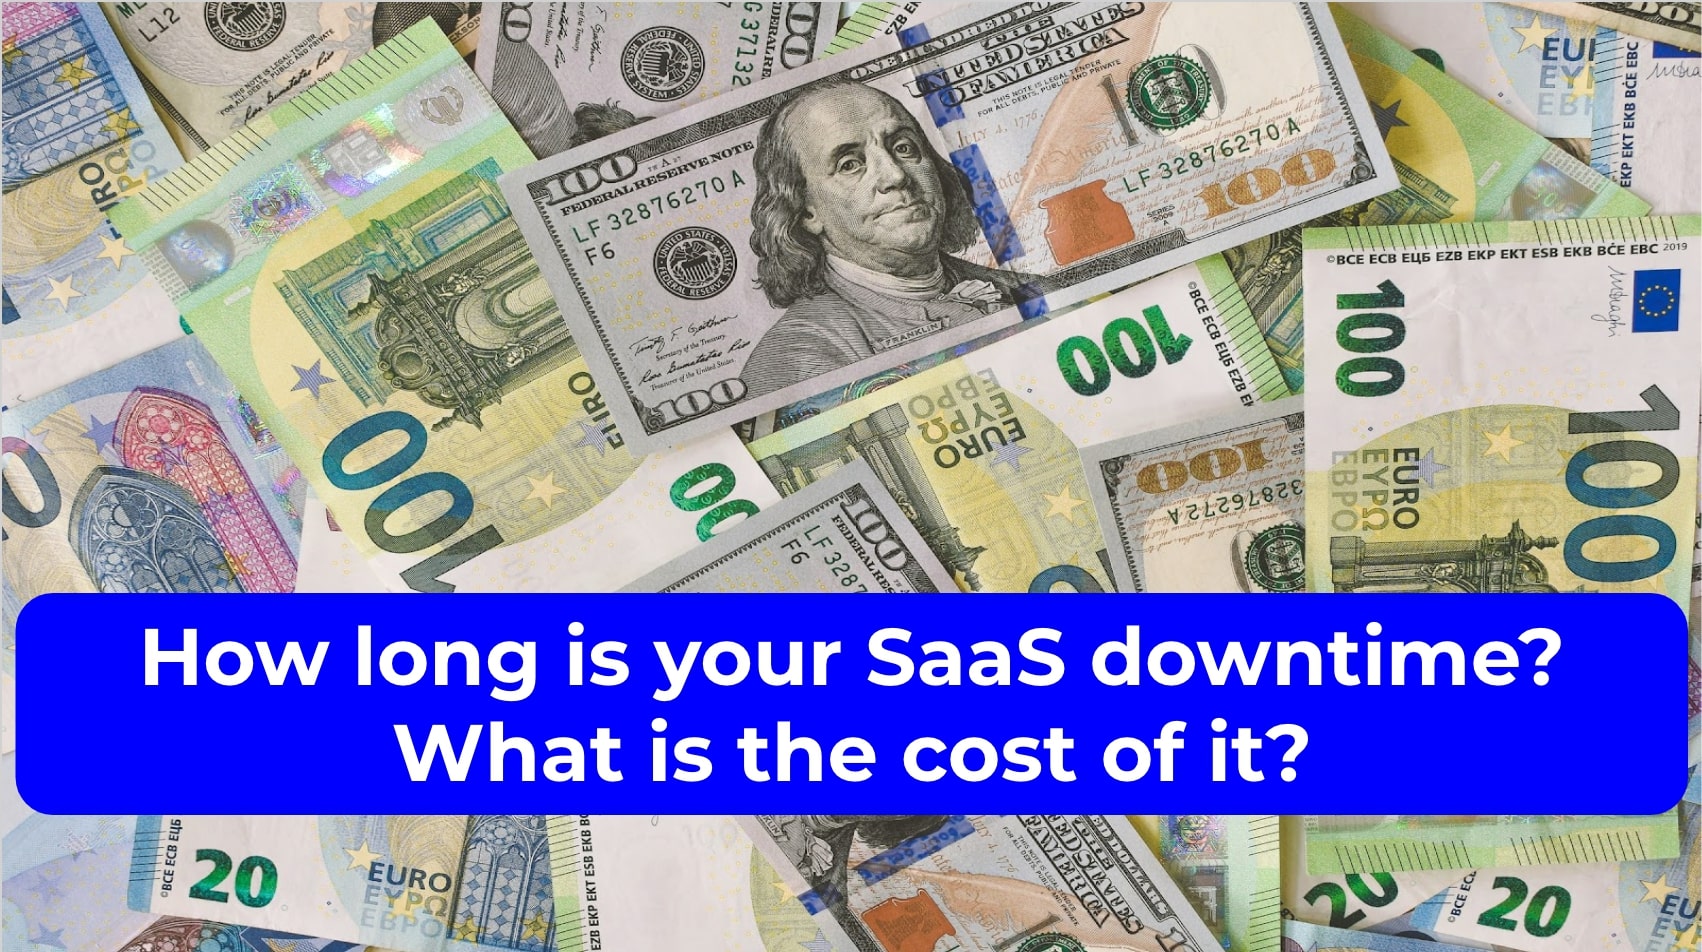 How long is your SaaS downtime? What is the cost of it?